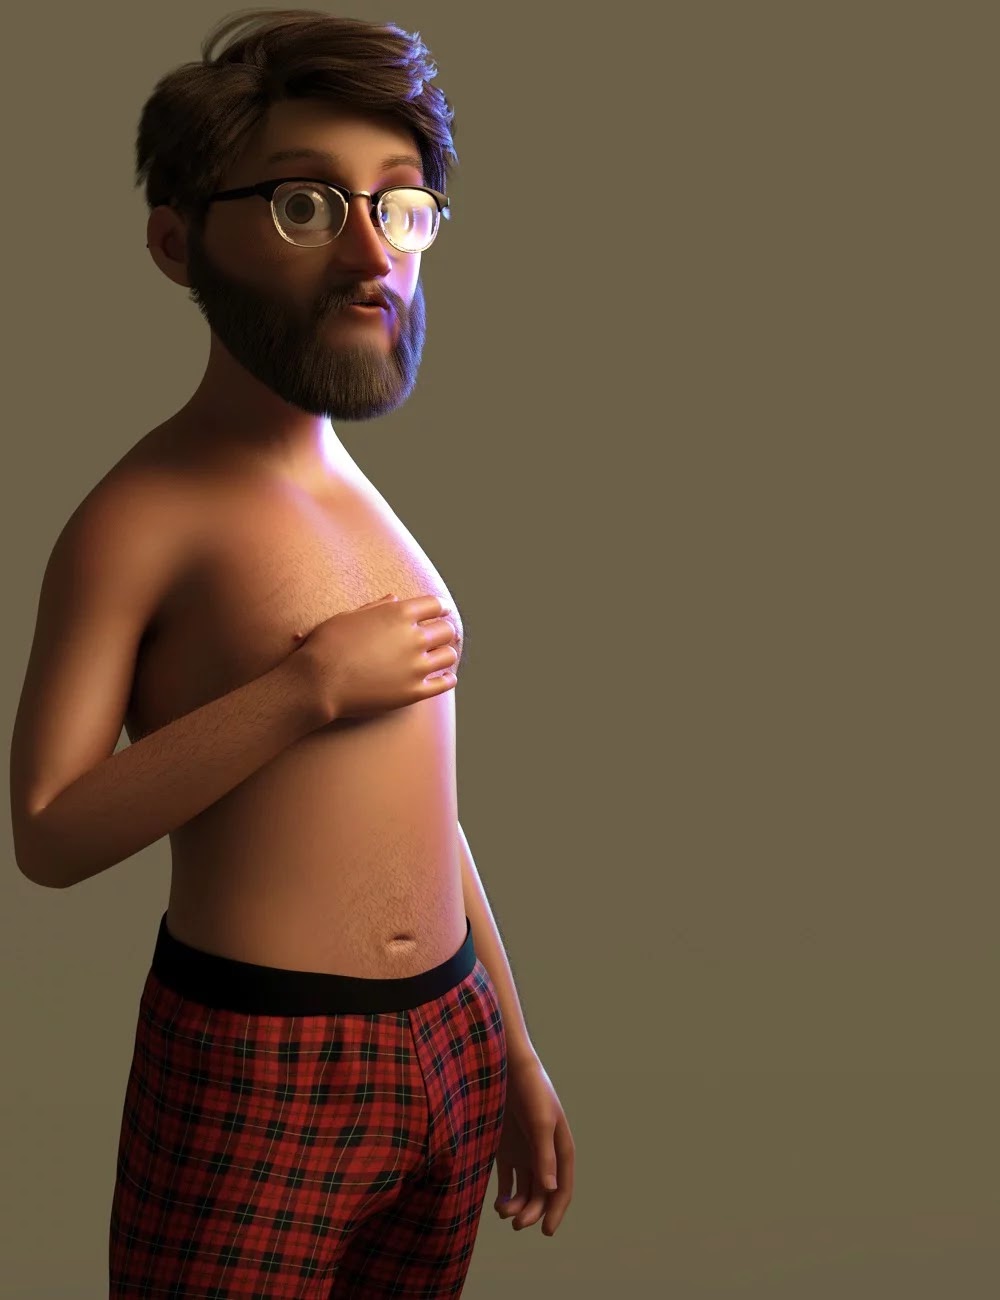 Toon Dad and Fatherly Beard and Accessories for Genesis 8 Male_DAZ3D下载站